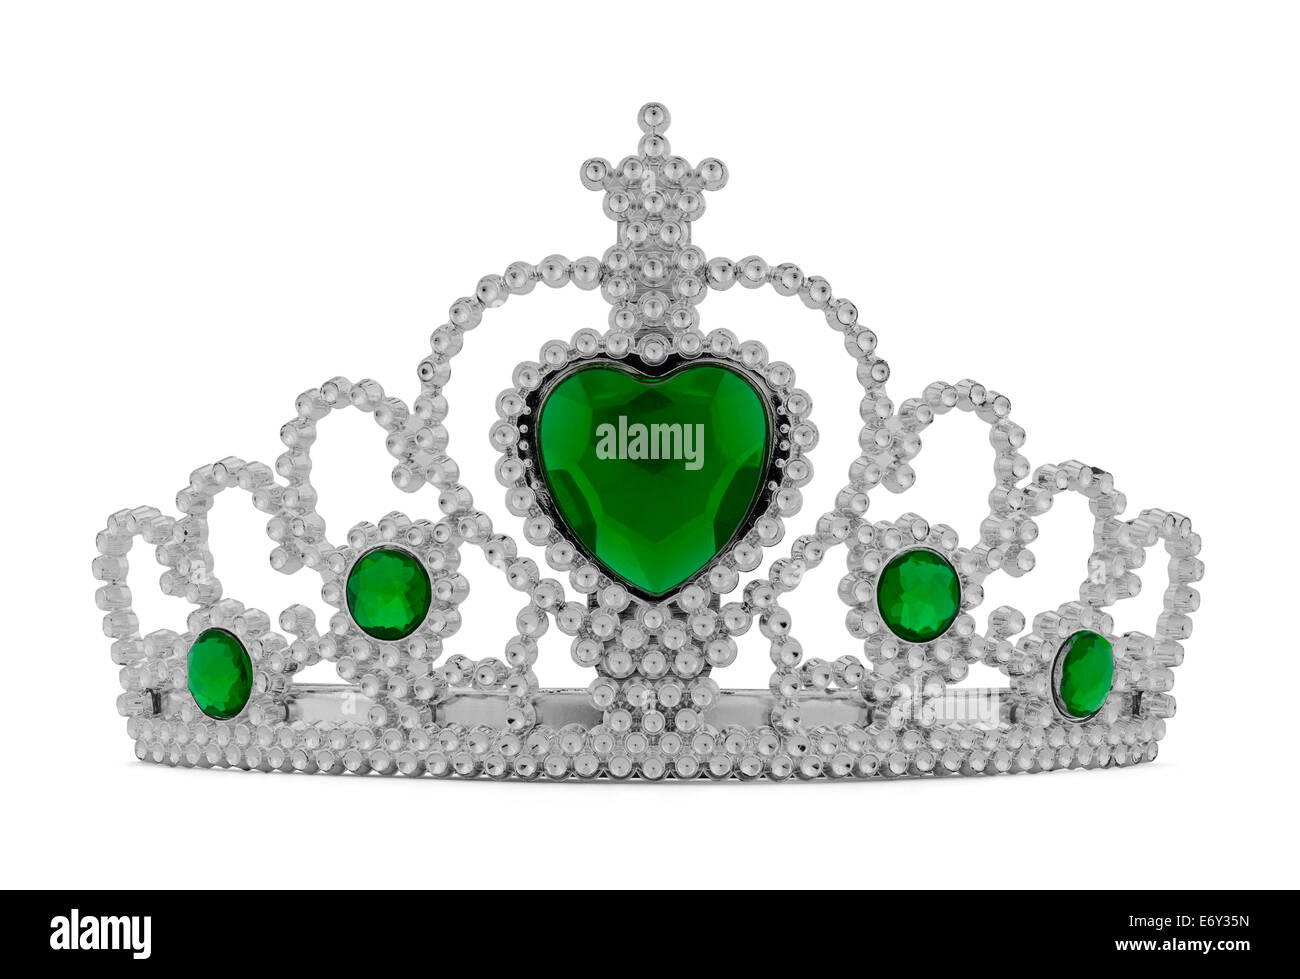 Girls Silver Tiara Crown with Green Heart Isolated on White Background. Stock Photo